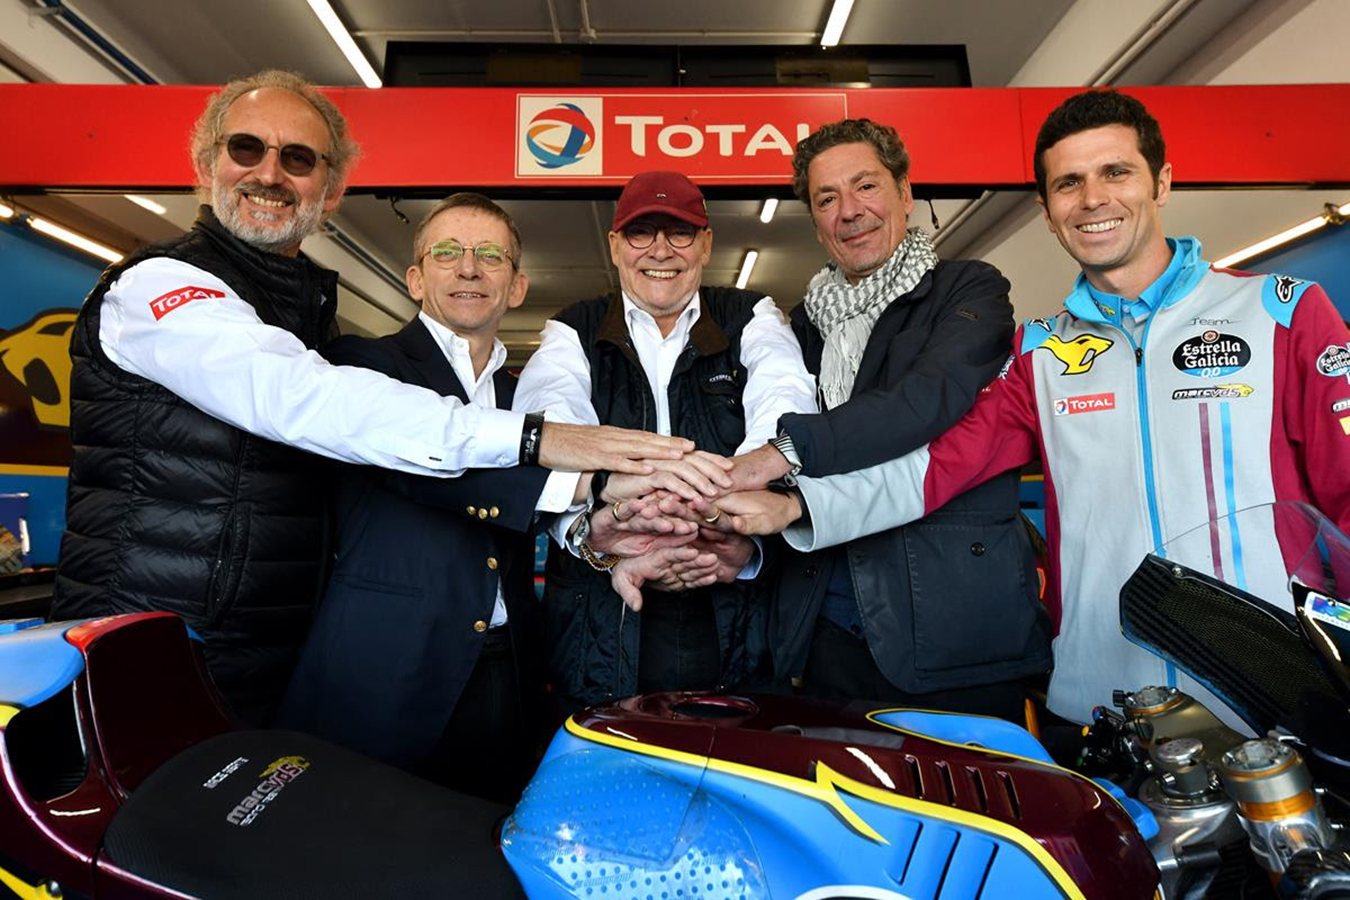 Team Estrella Galicia 0,0 Marc VDS agrees new two-year partnership with Total
